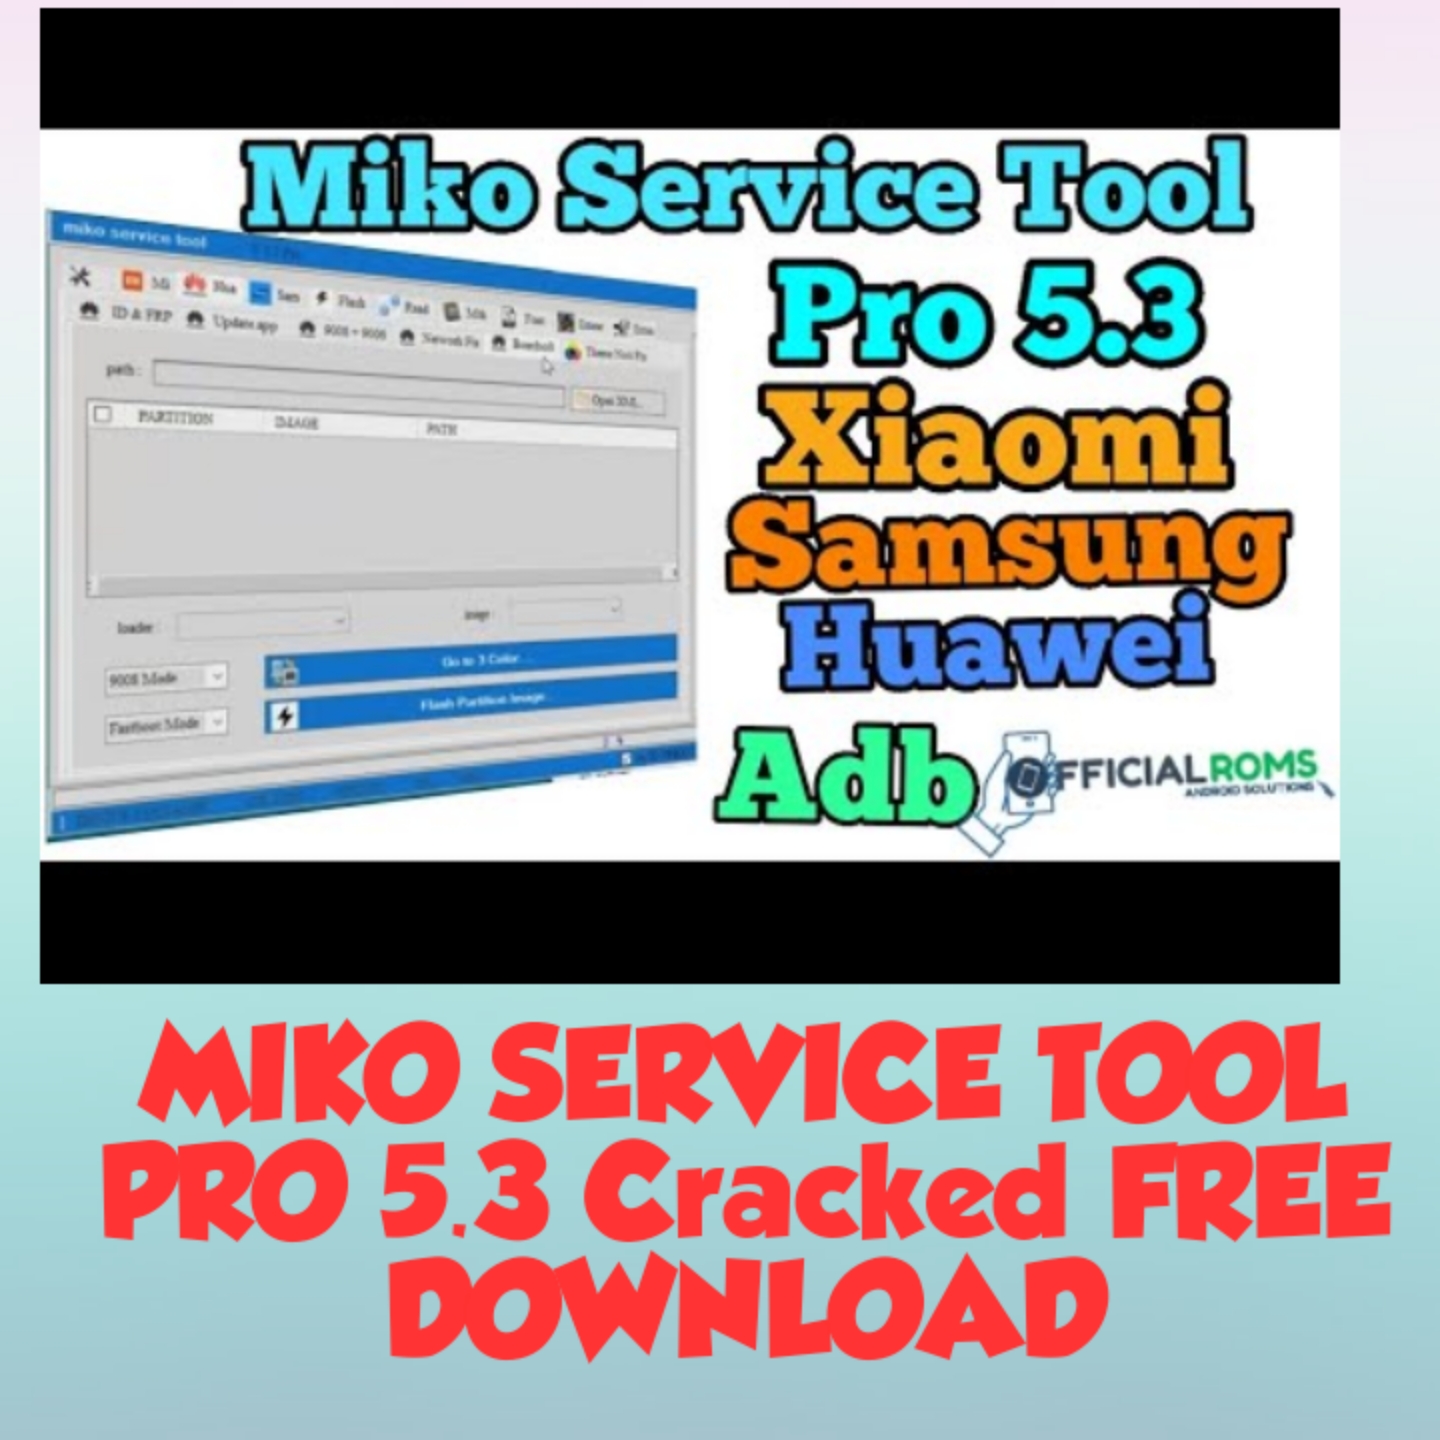 MIKO SERVICE TOOL PRO 5.3 Cracked FREE DOWNLOAD